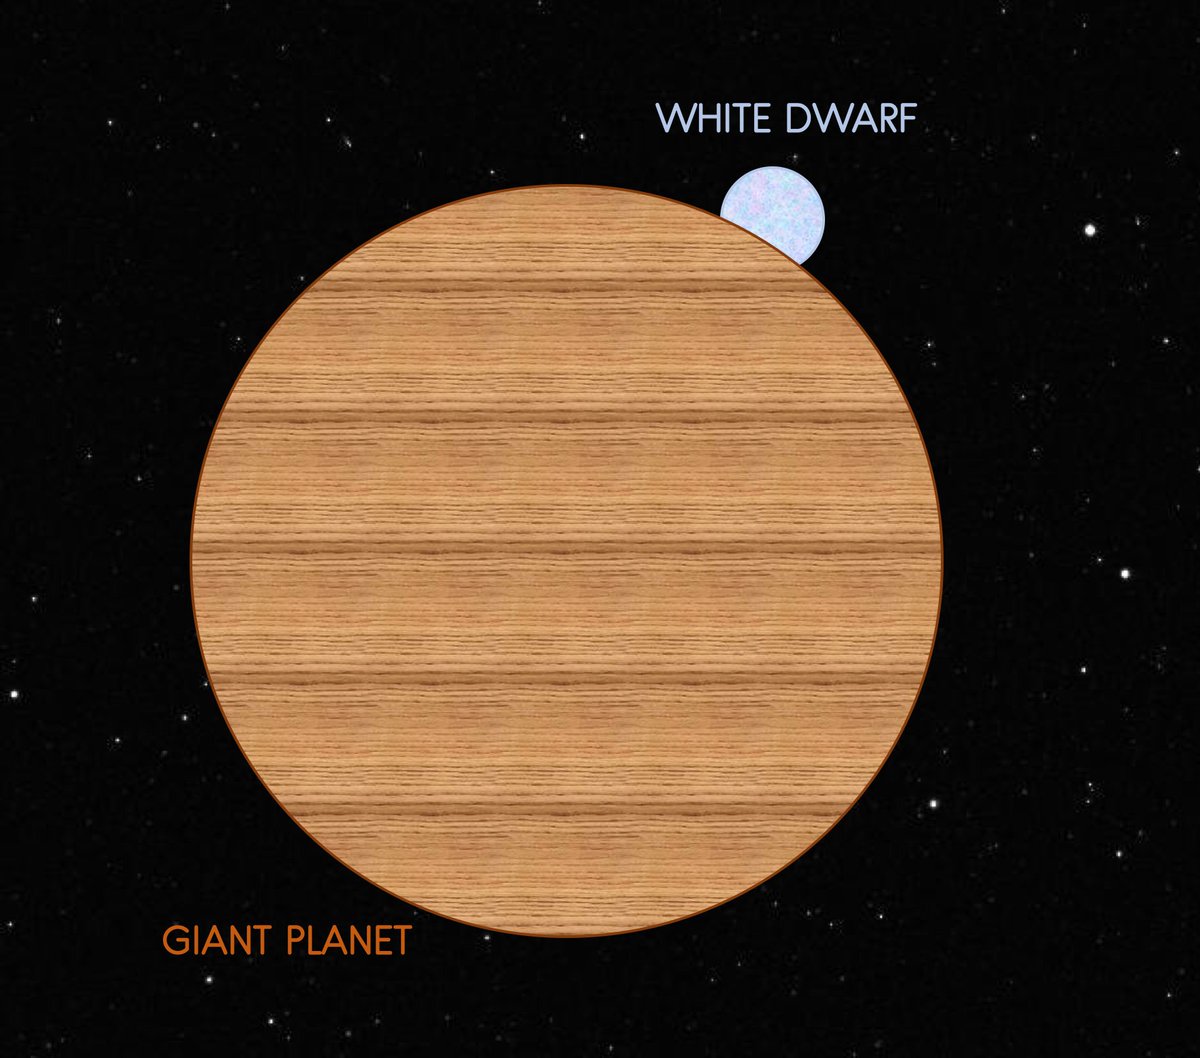 In fact, it was a giant planet!!! (Actually, right on the border between a giant planet and a brown dwarf). Here’s my terrible graphic of their relative sizes. Yes those are powerpoint textures. The planet is ~7 times the size of the star.  #notanillustrator